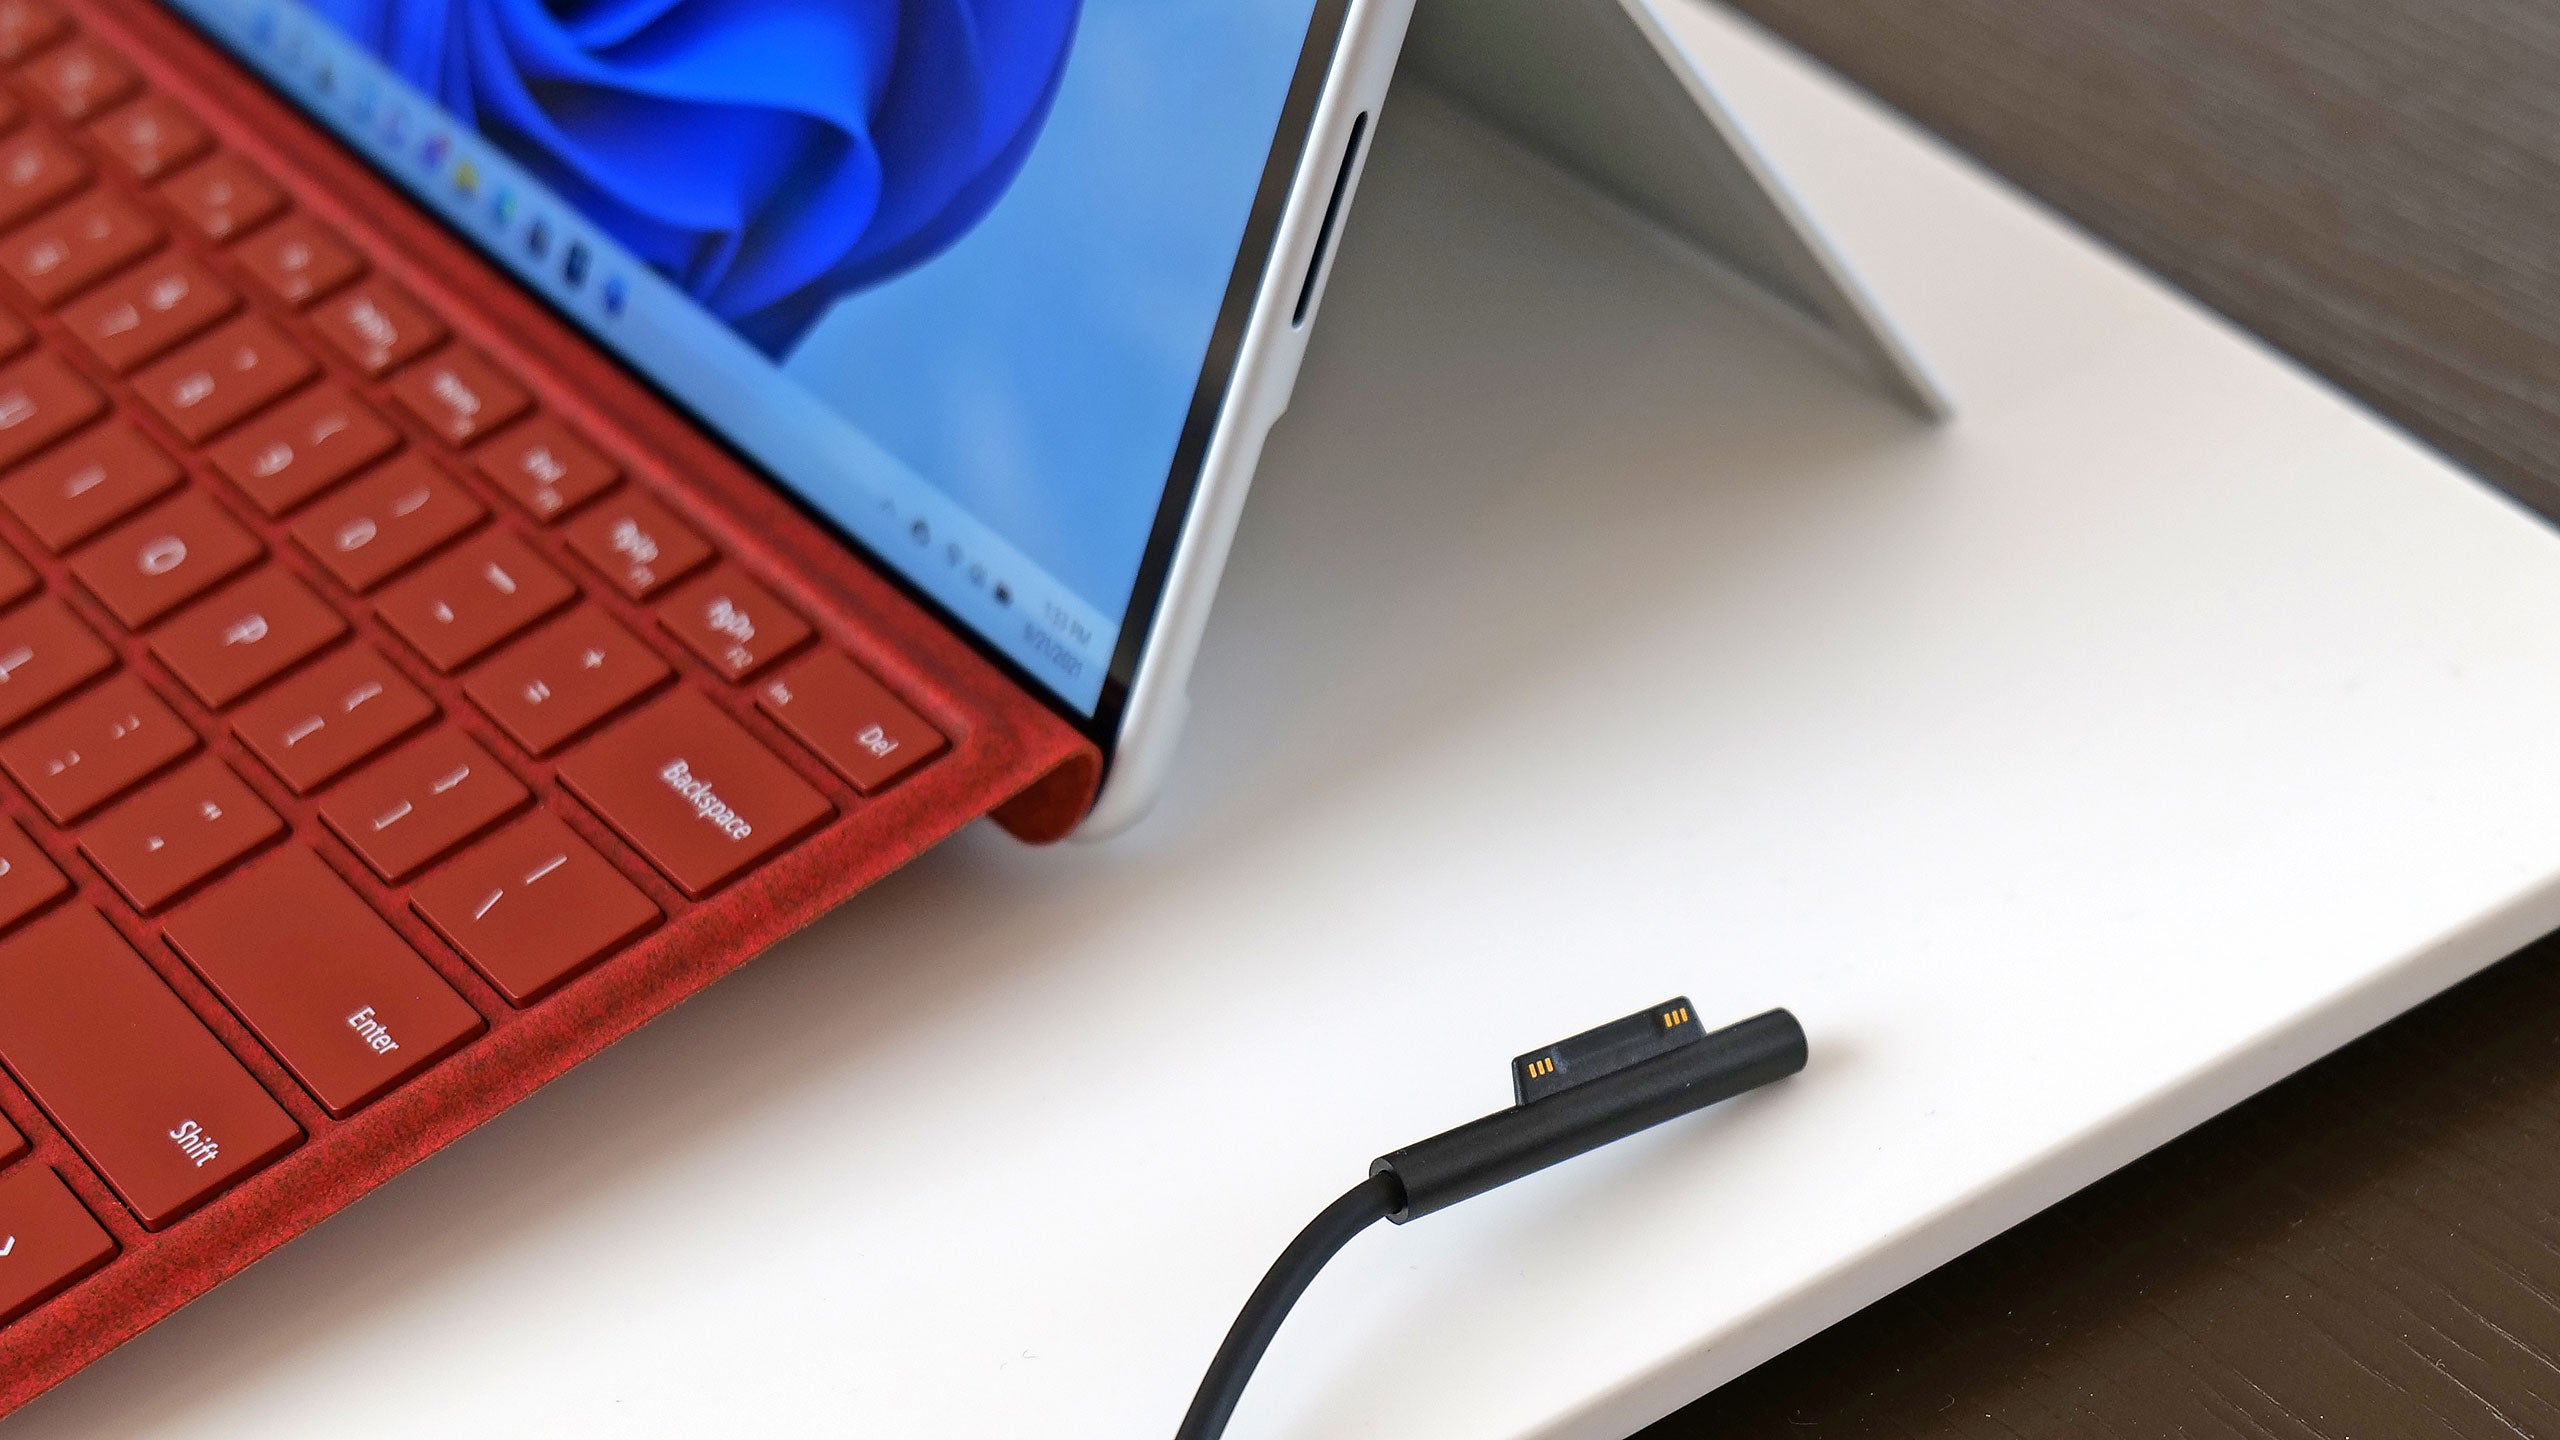 While some people (including me) might prefer a third USB-C port, Microsoft isn't giving up on the Surface line's magnetic power connector.  (Photo: Sam Rutherford)